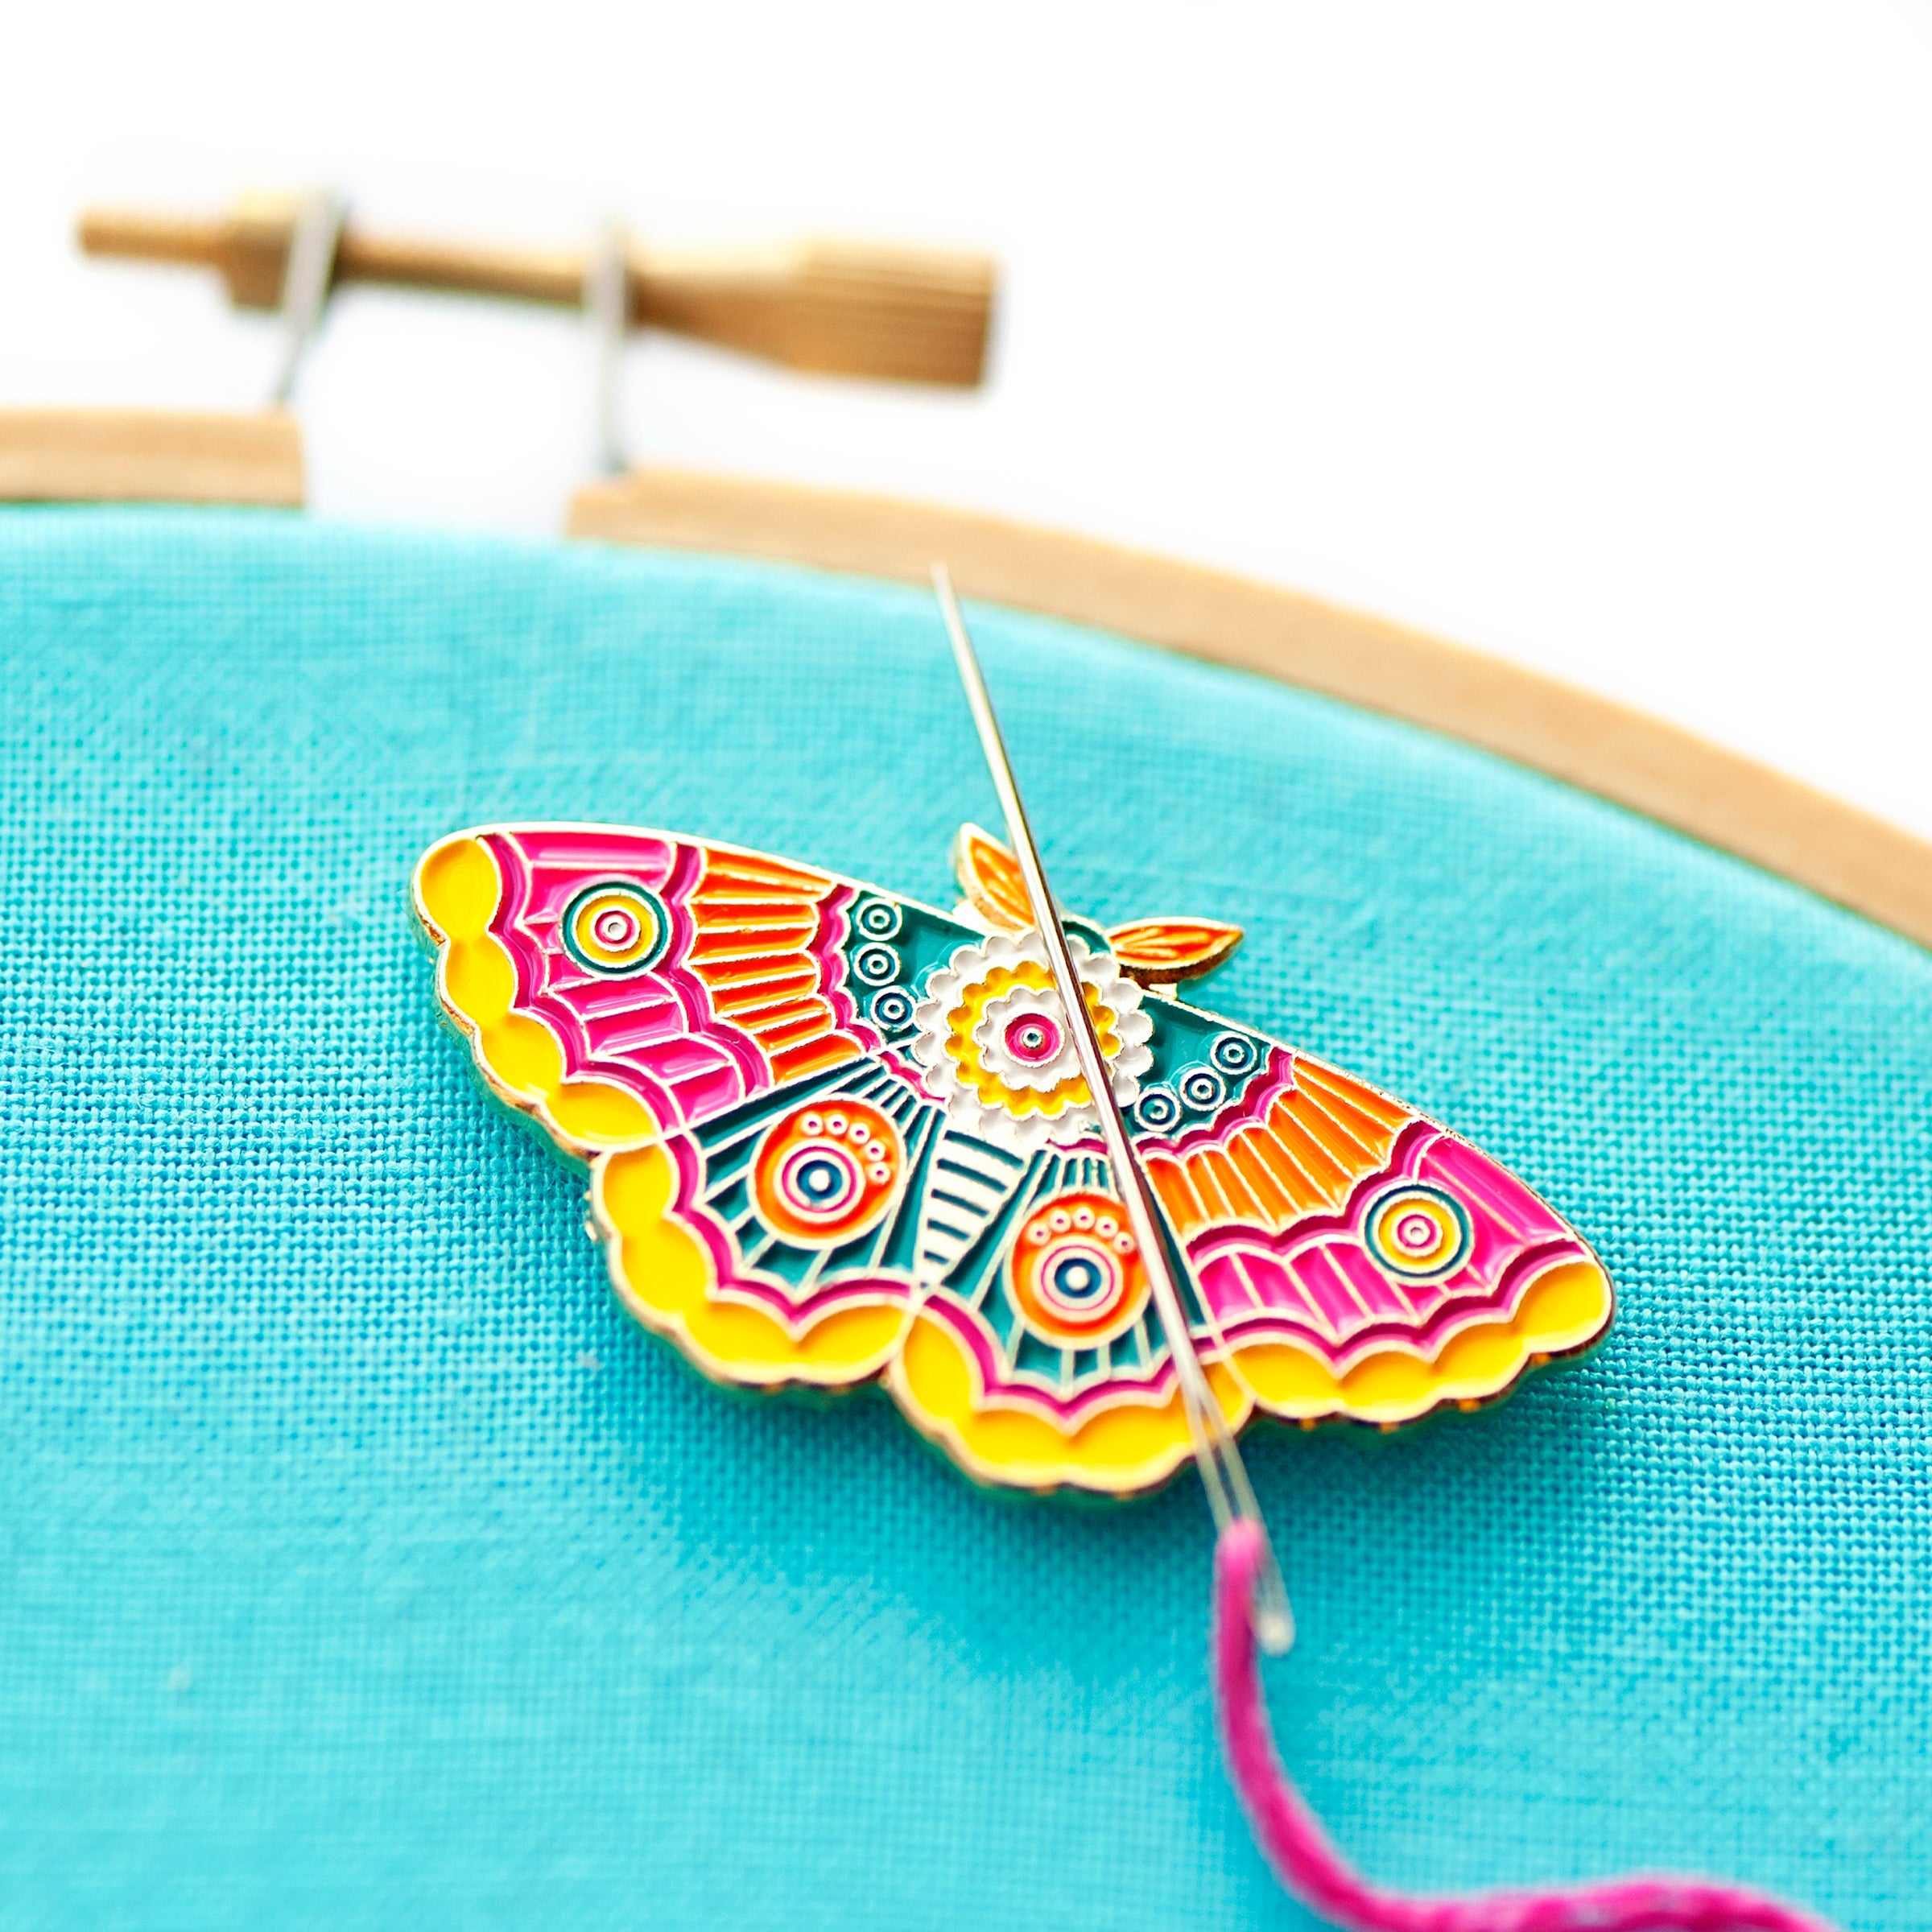 Needle Minders – Lolli and Grace